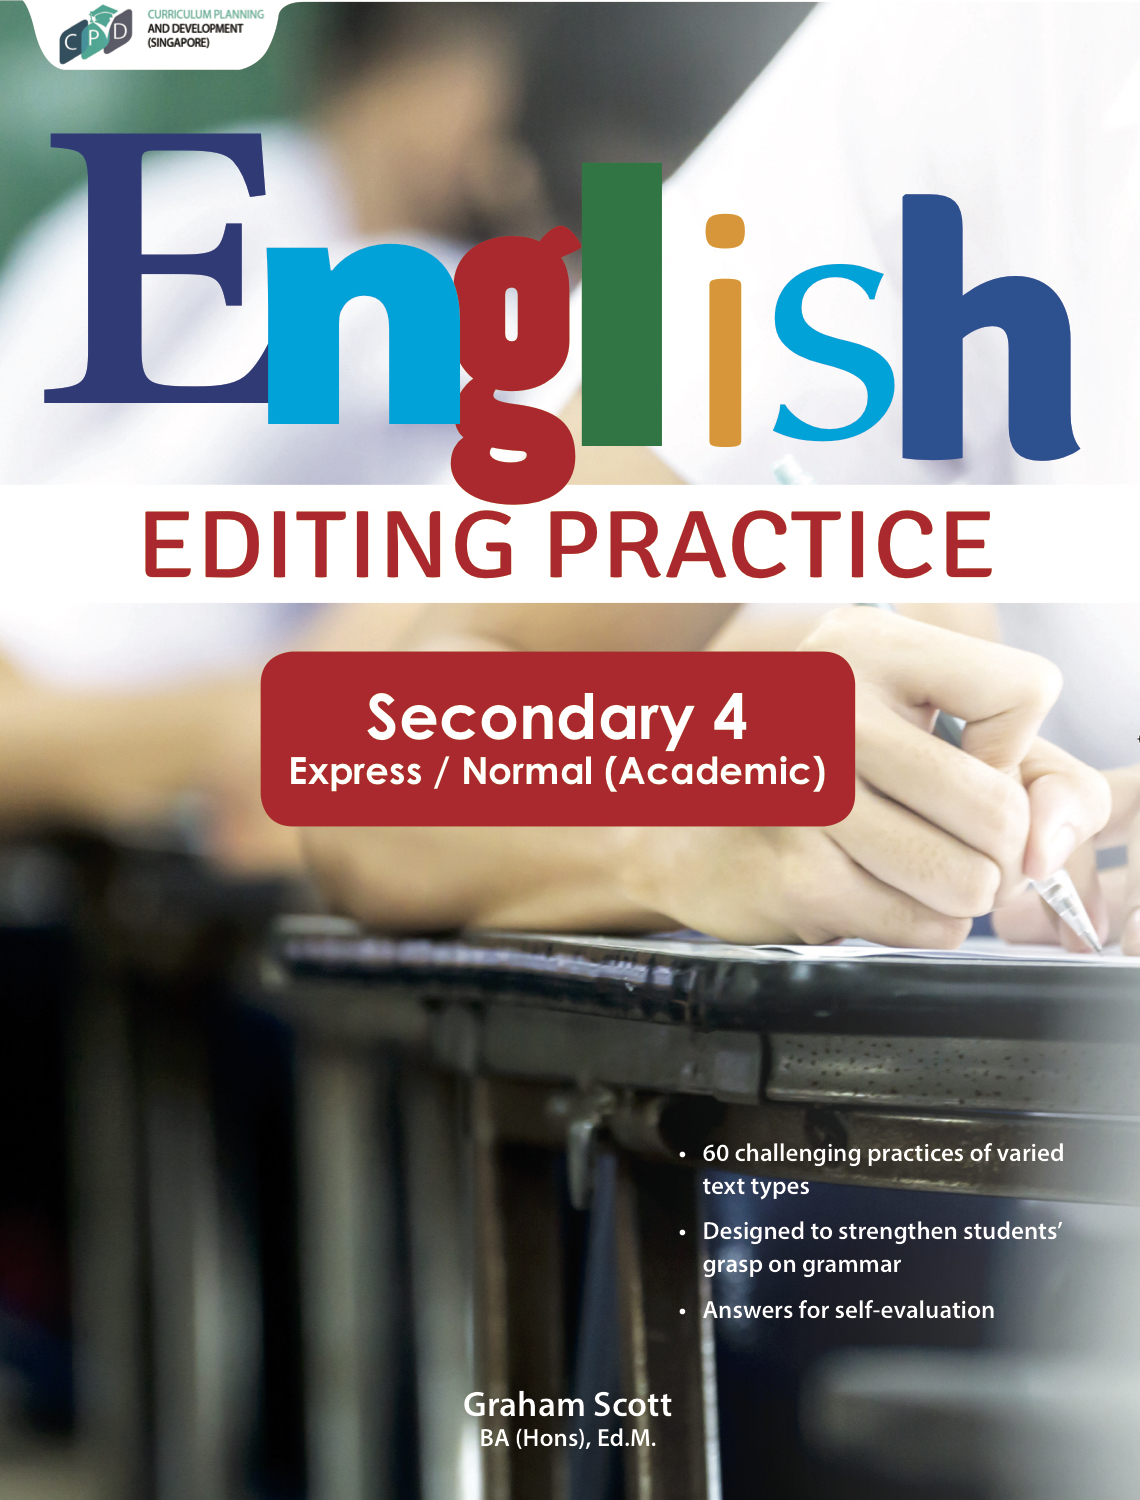 english-editing-practice-secondary-4-exp-n-a-cpd-singapore